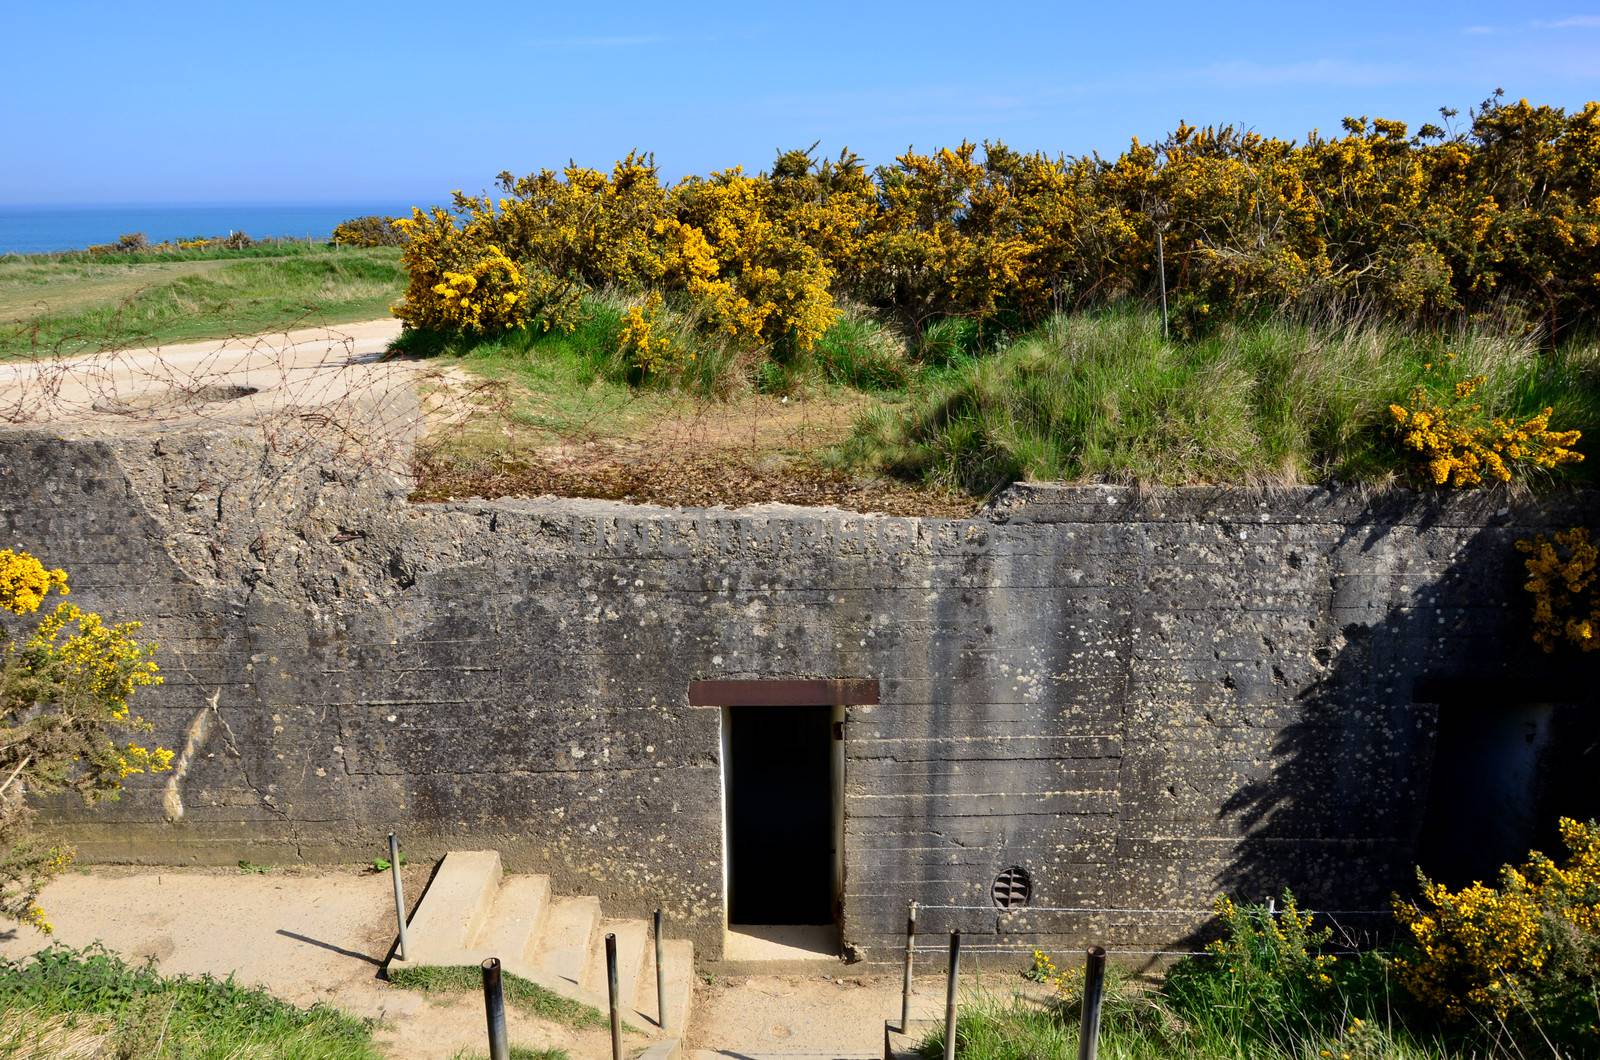 Bunker German, Omaha Beach, Normandy, France by lauria